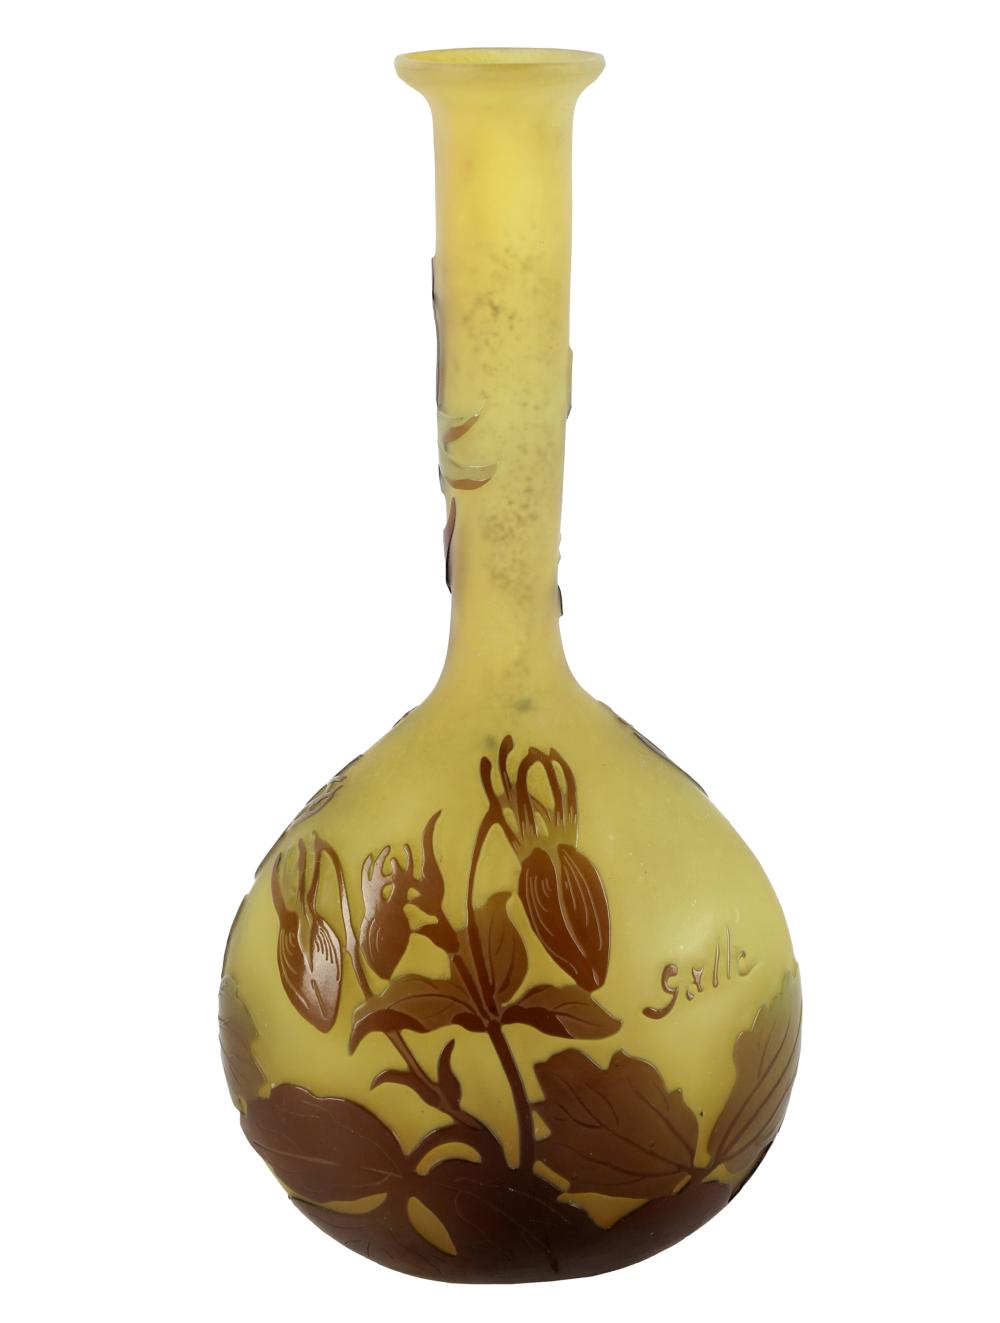 CAMEO GLASS VASEsigned in cameo Galle;